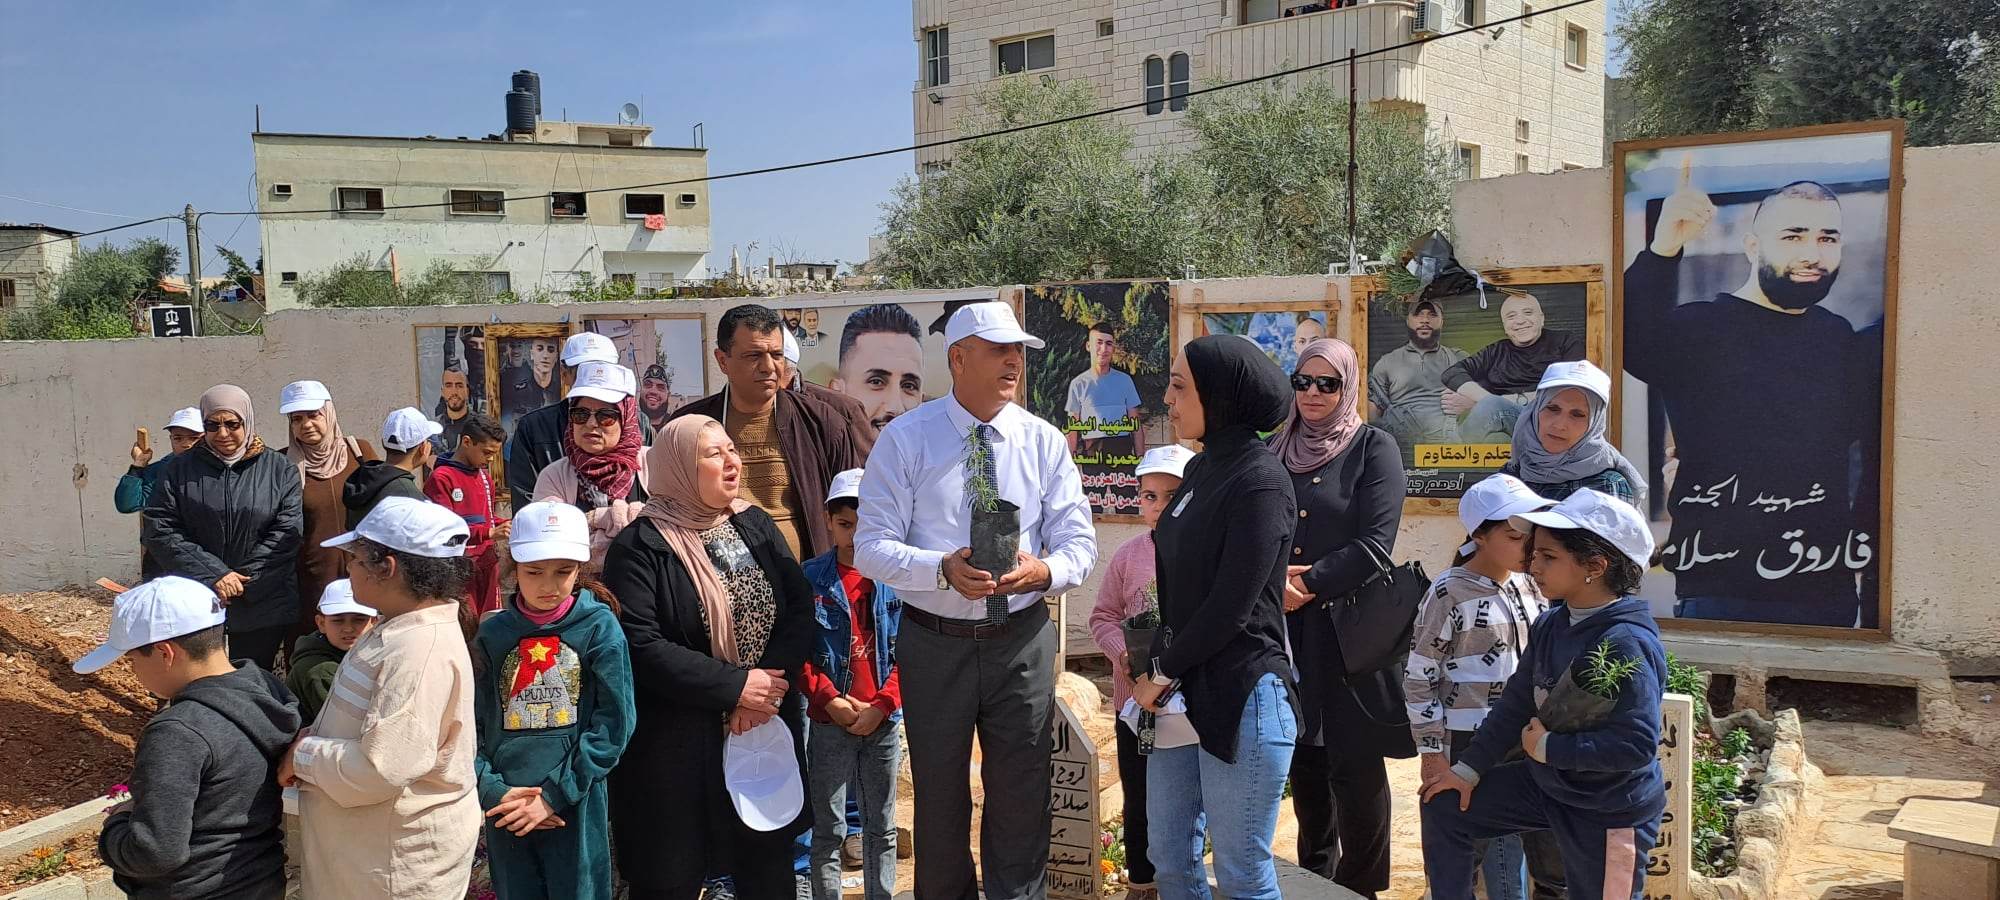 On the occasion of the Palestinian National Environment Day, an event was organized entitled "An Environmentally Aware Generation... A Resilient Generation...